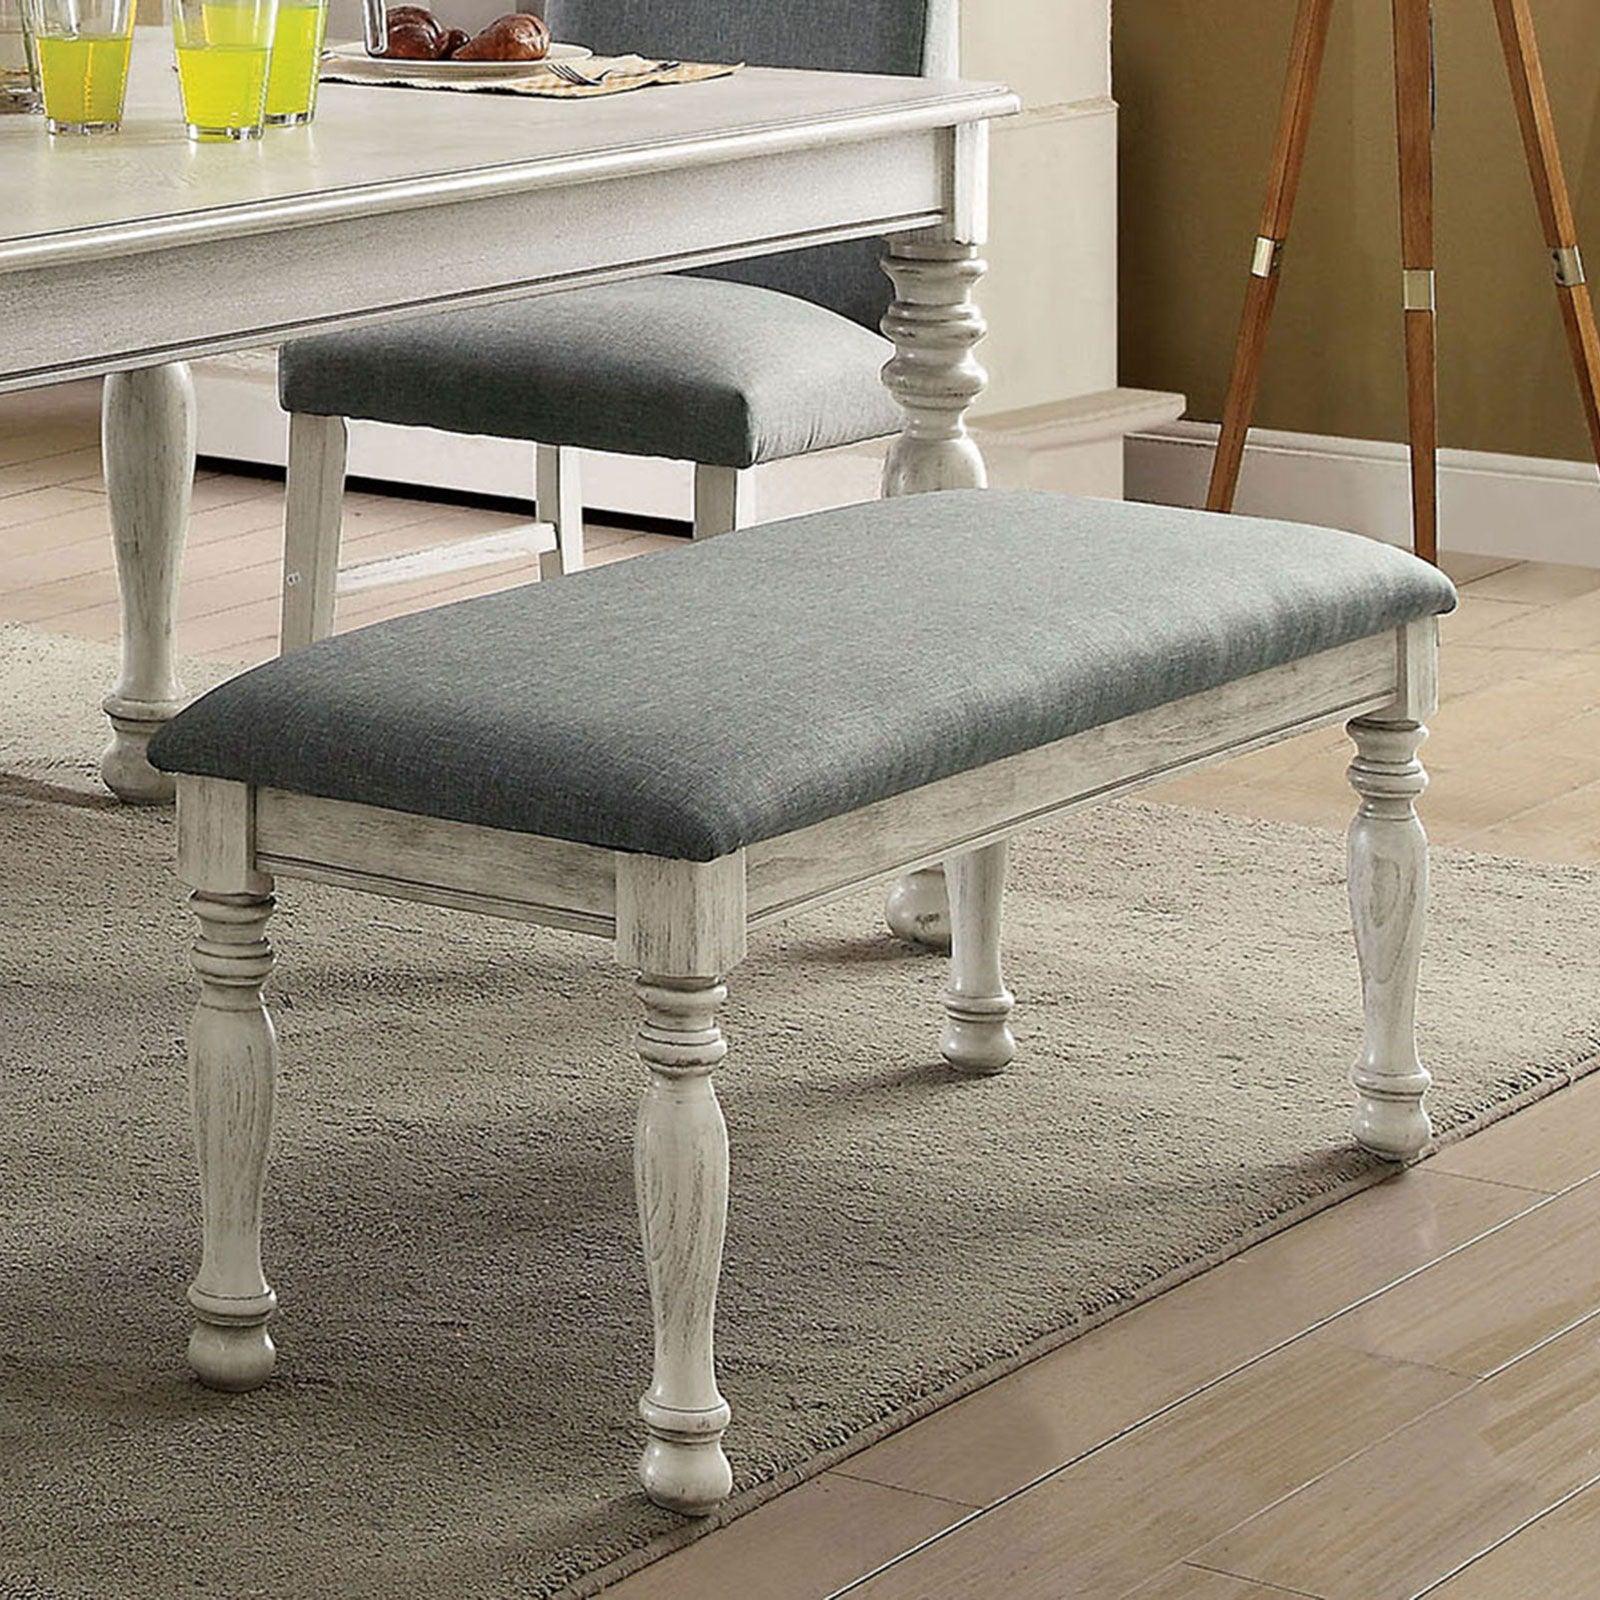 Furniture of America - Siobhan - Bench - Antique White / Gray - 5th Avenue Furniture